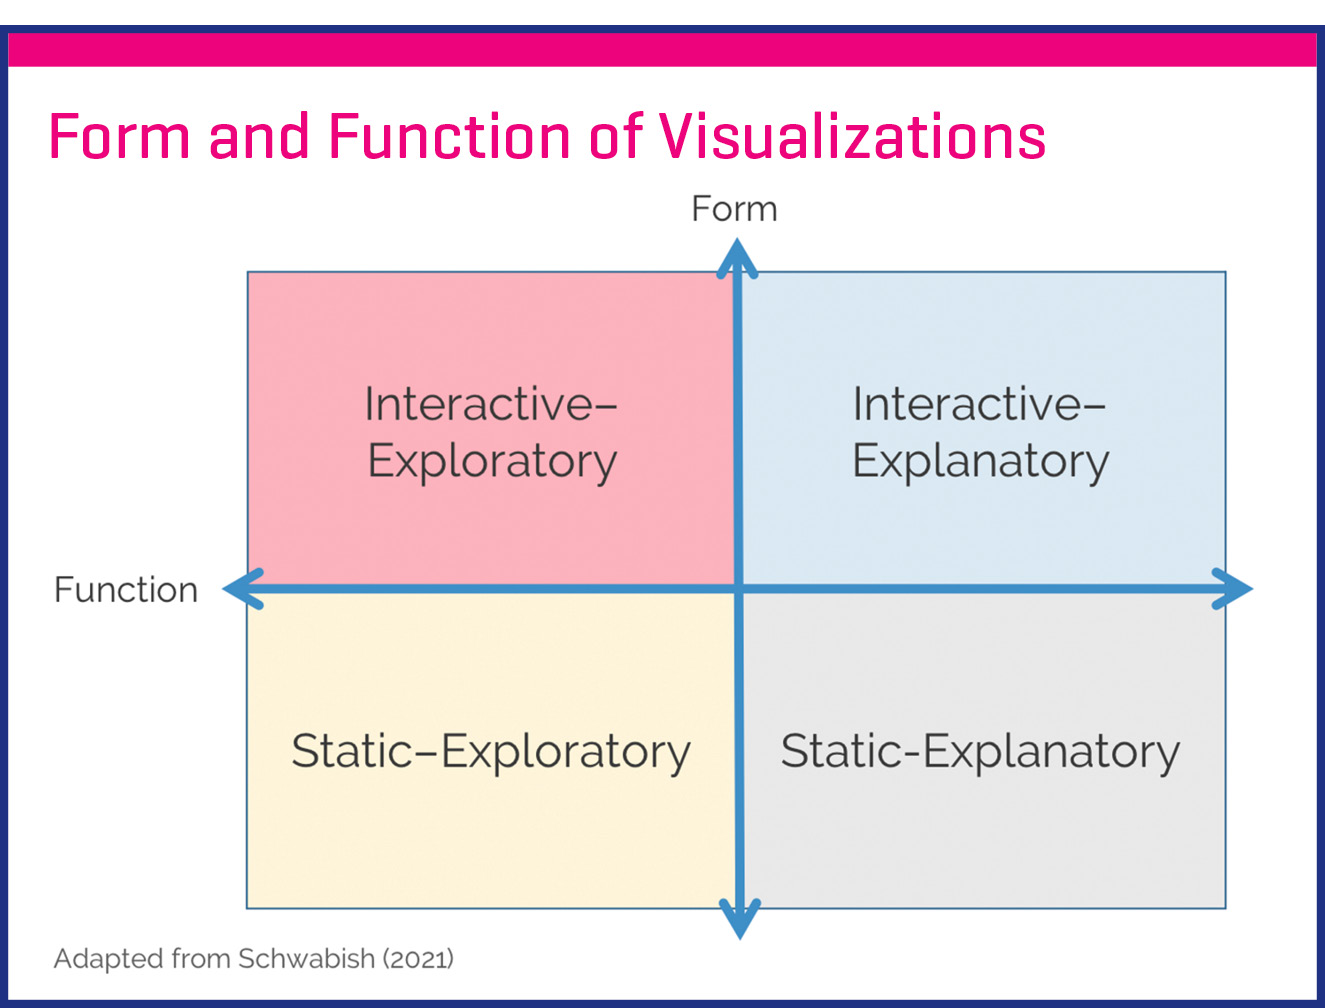 form and function of visualiztions